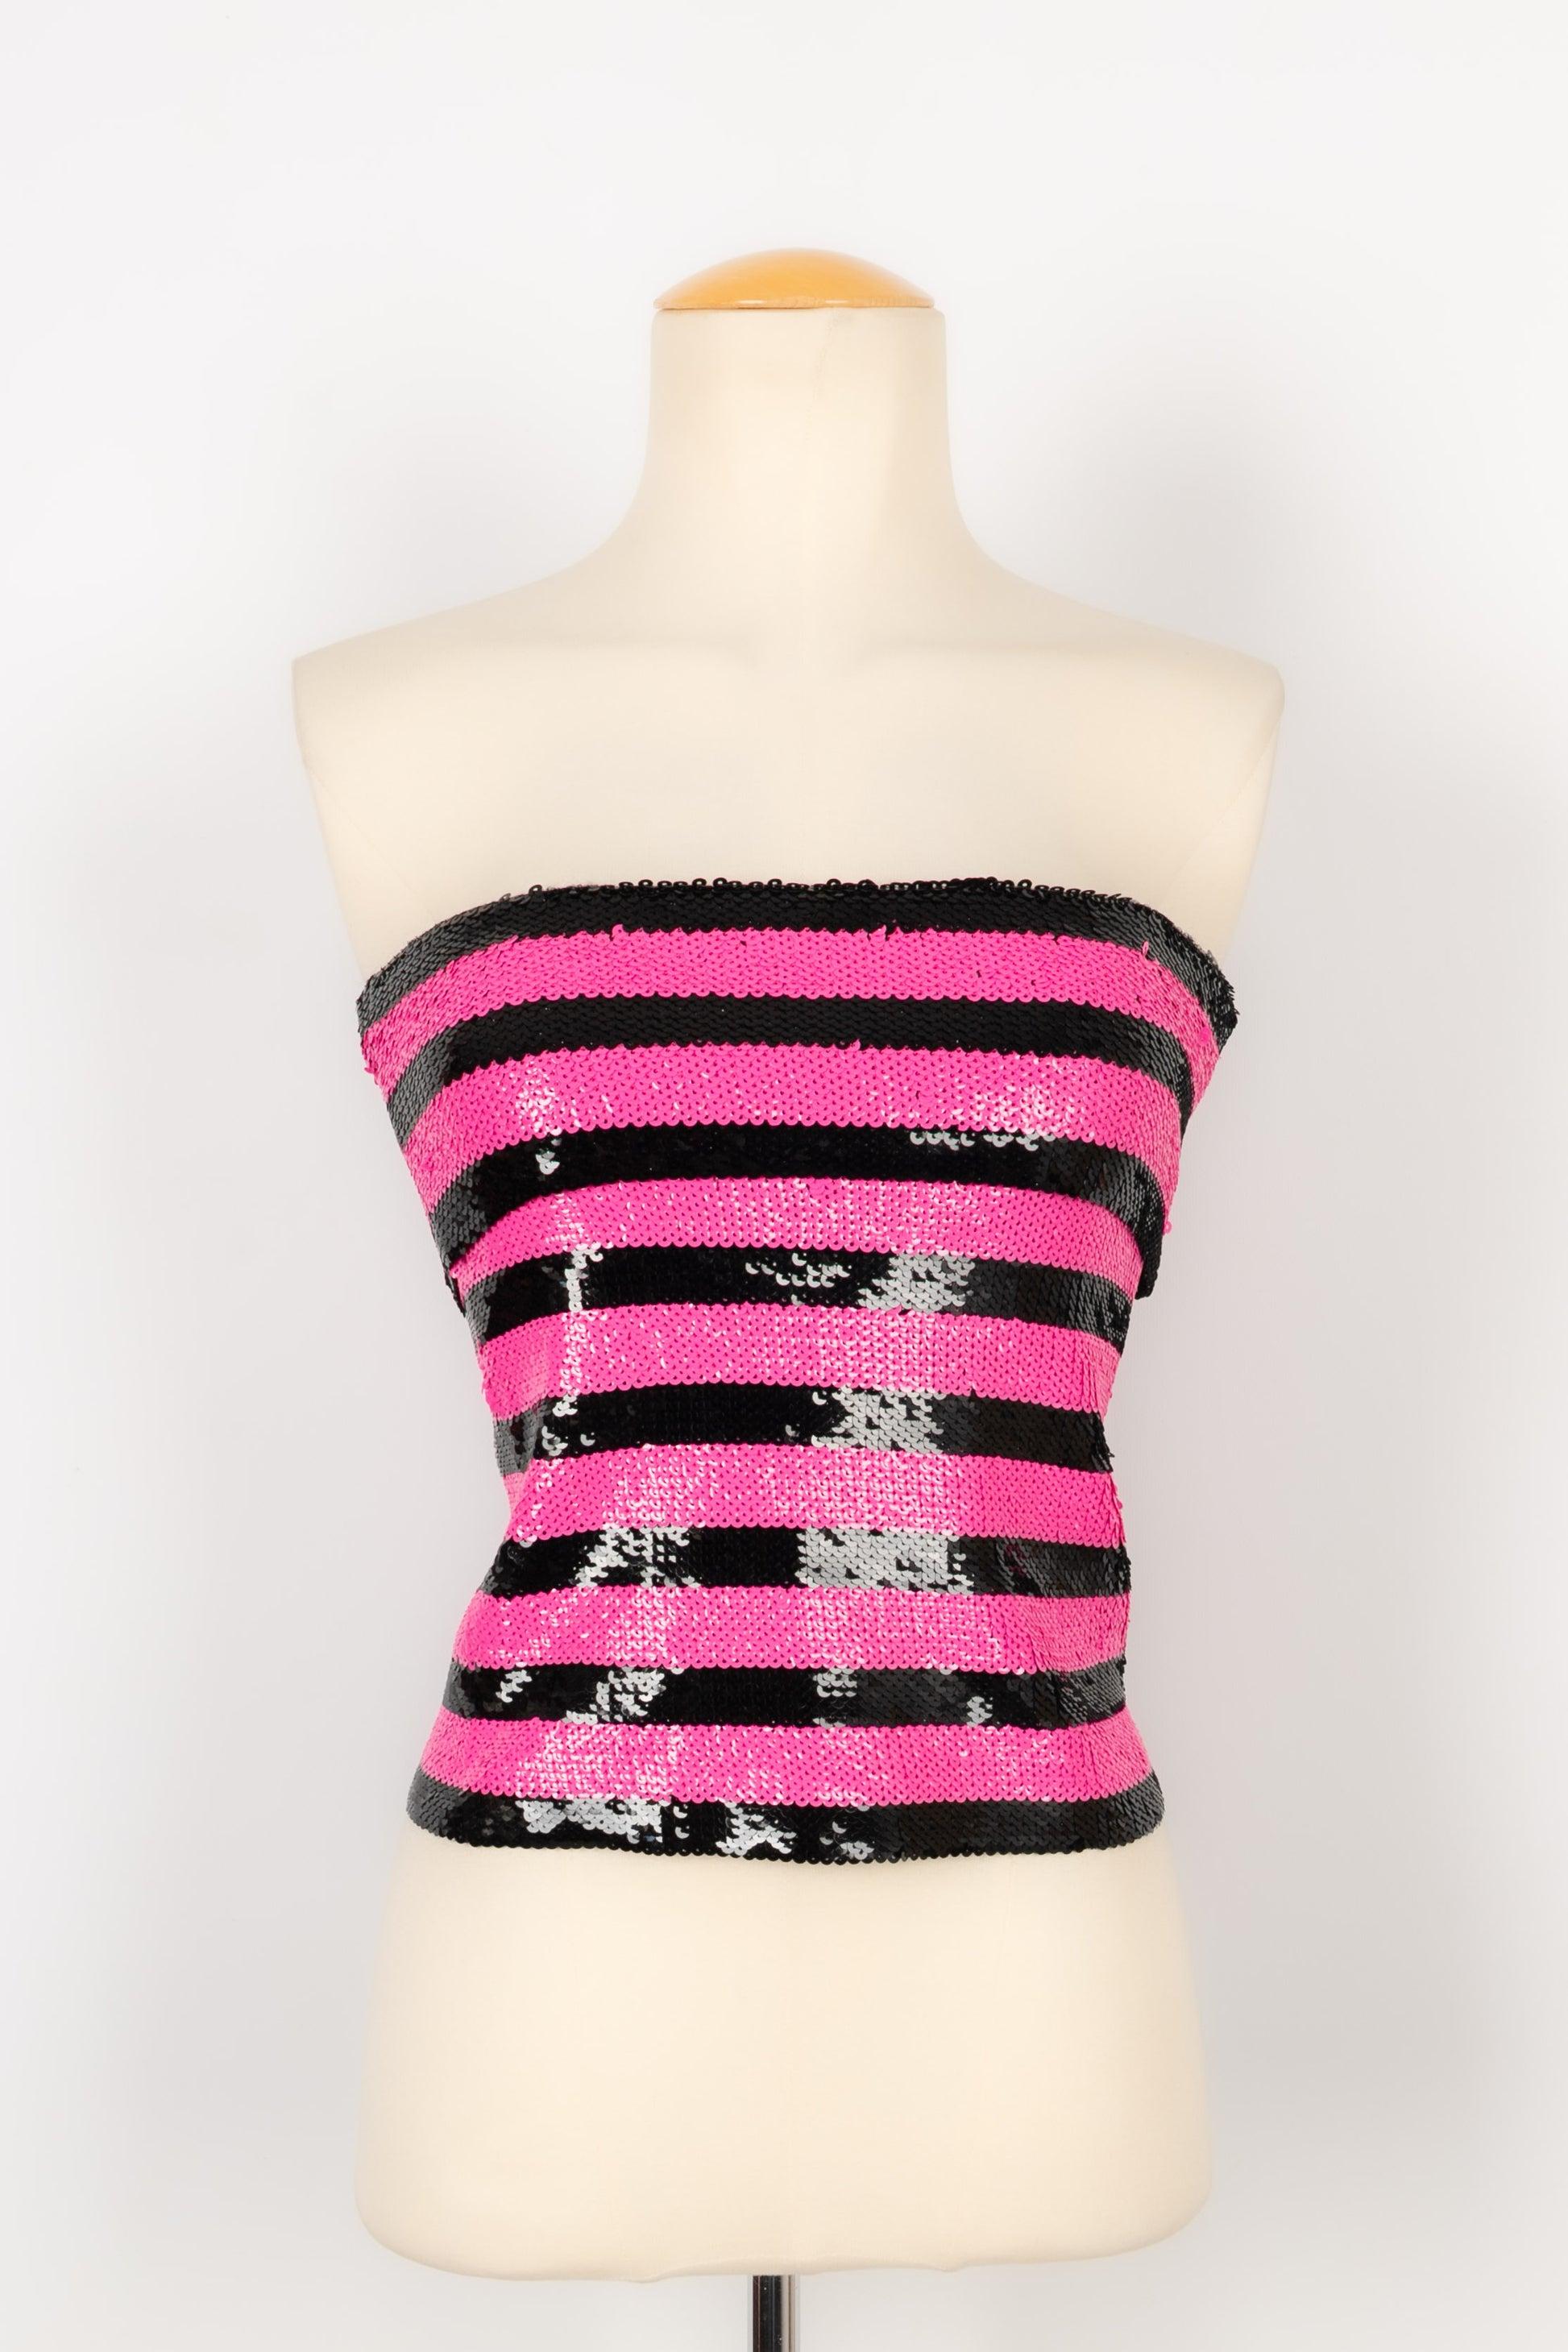 Yves Saint Laurent Black and Pink Sequinned Bustier Top, 2013 For Sale